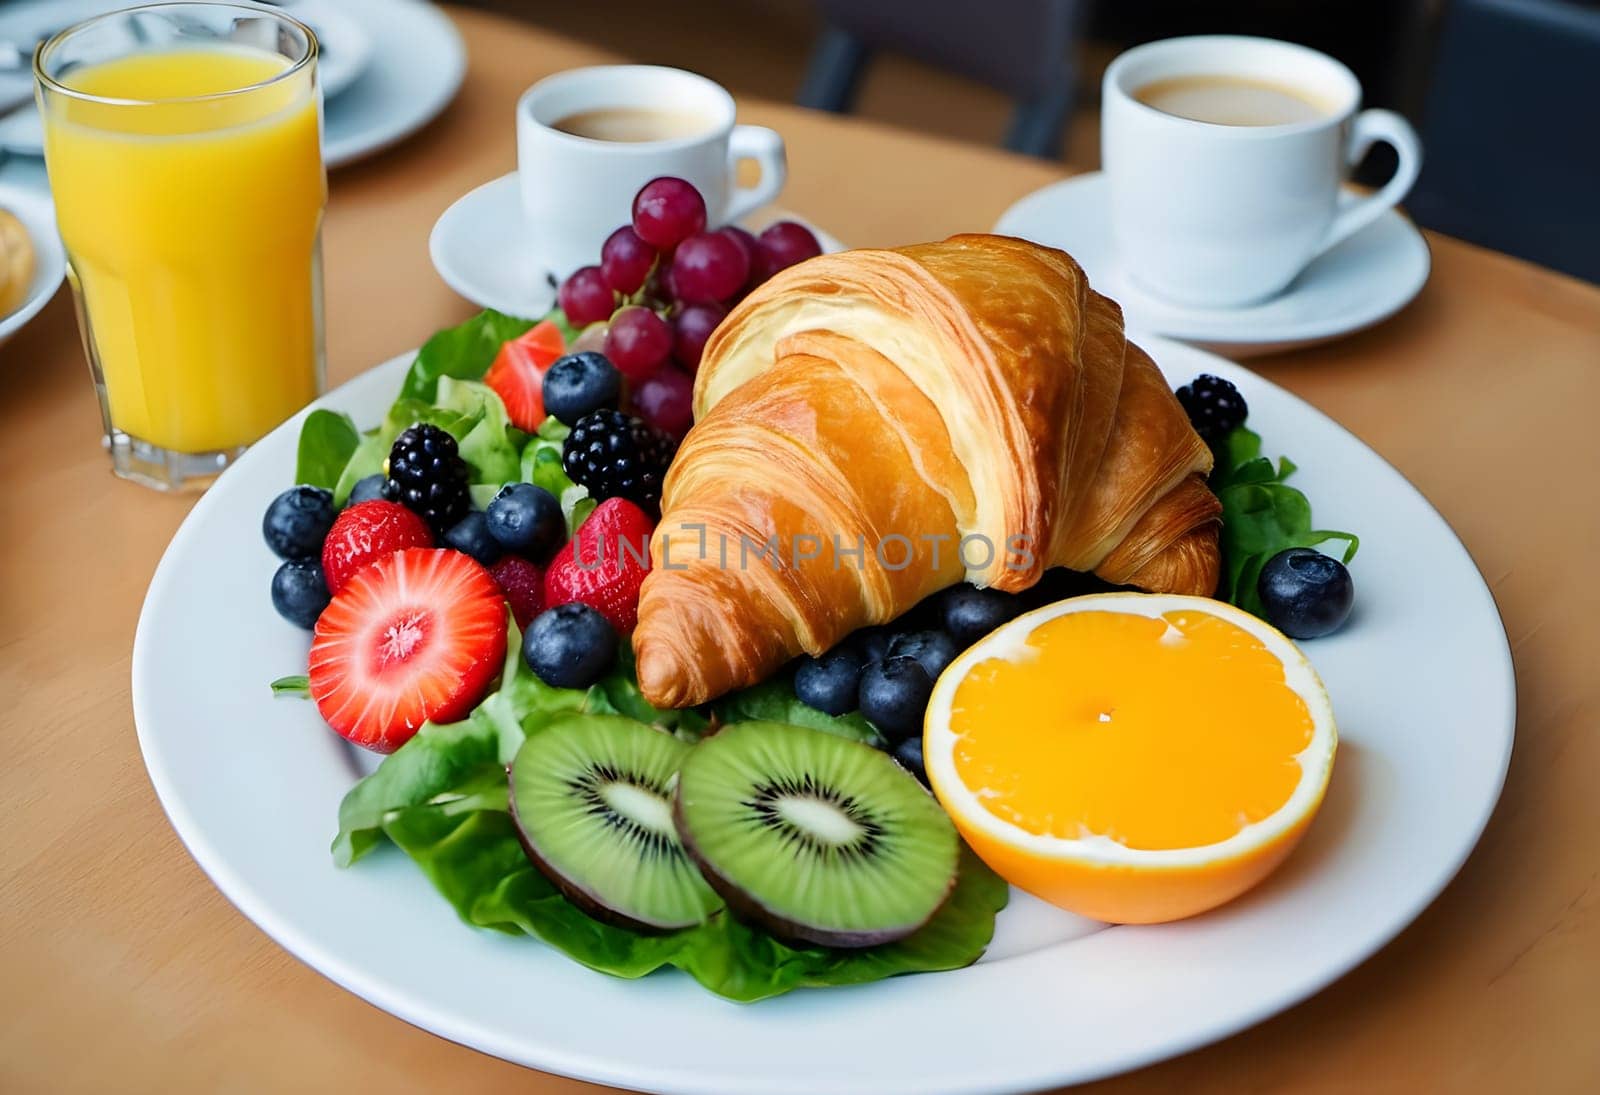 Continental Delights Gourmet Breakfast Creations with Croissants, Eggs, and Fresh Fruits